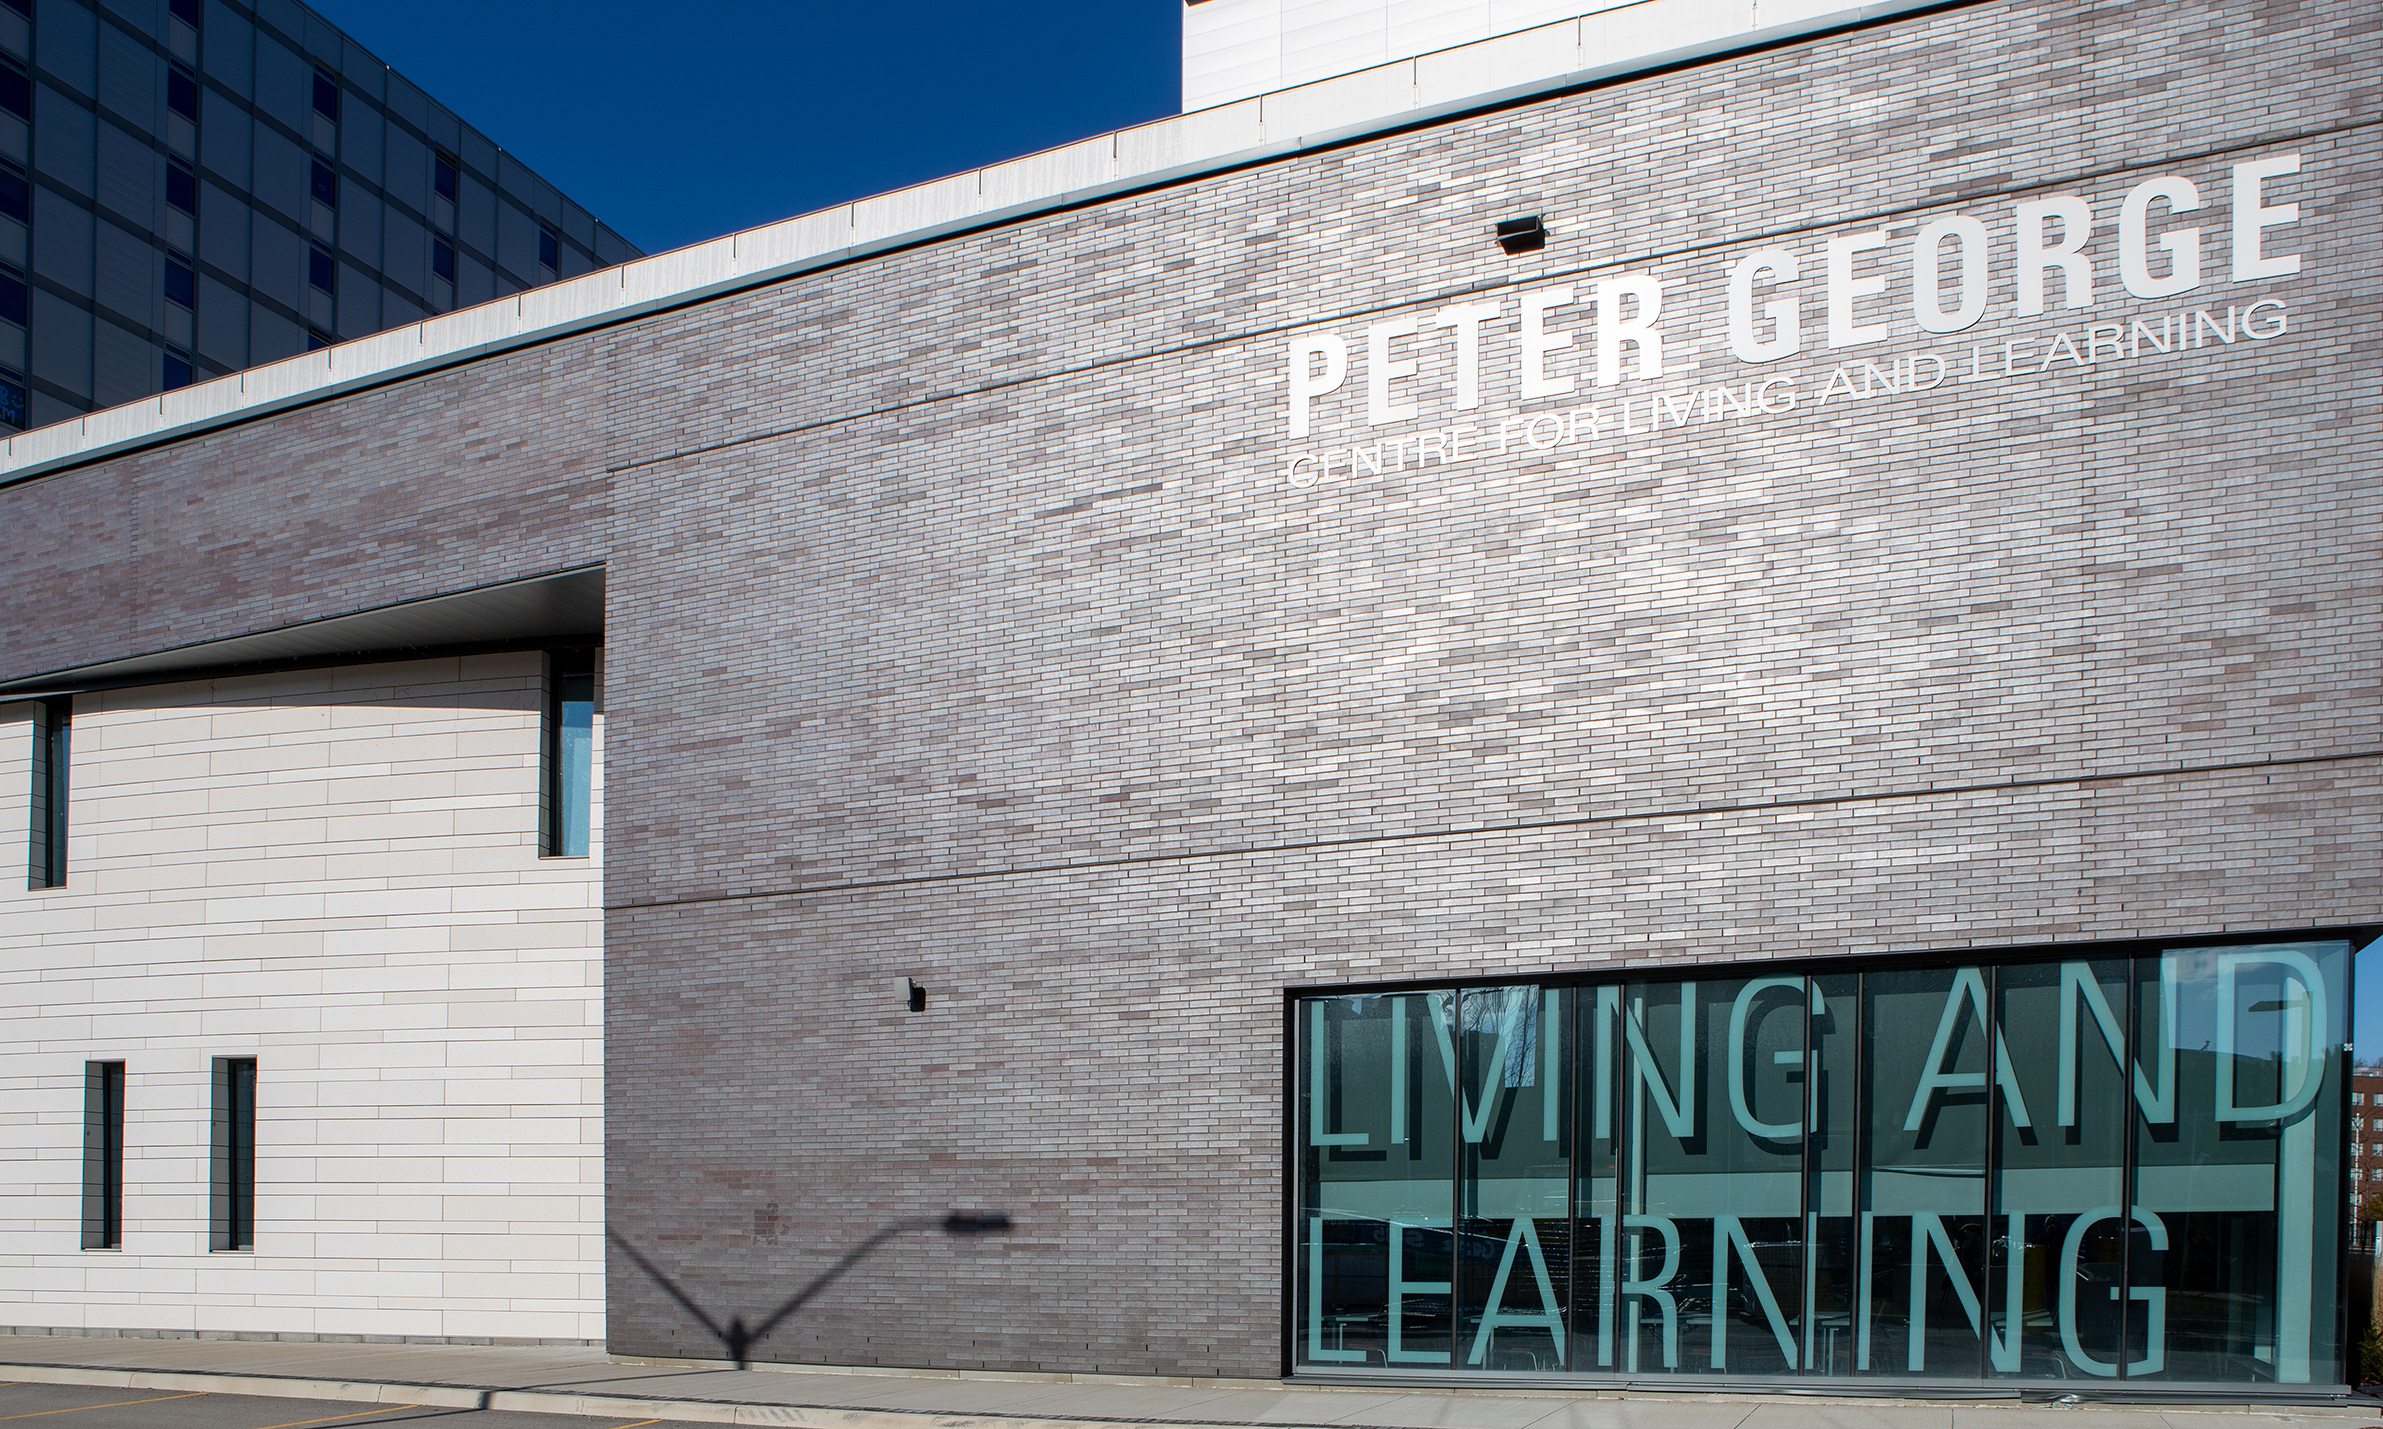 Peter George Centre for Living and Learning at McMaster University